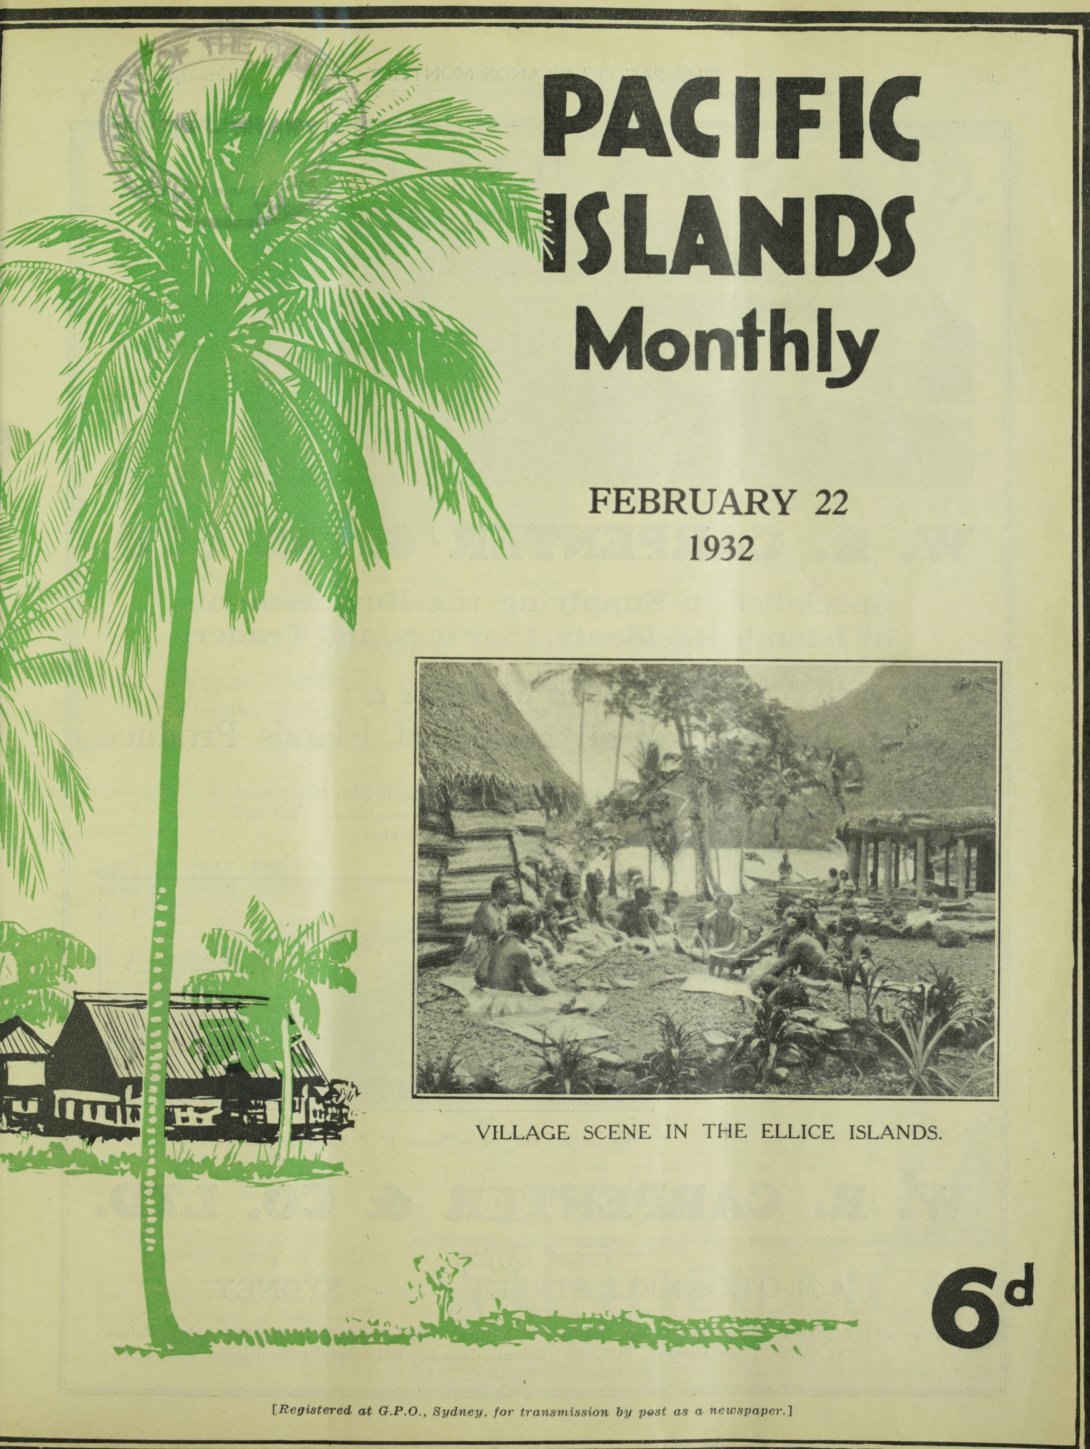 Pacific Islands Monthly, February 22, 1932.